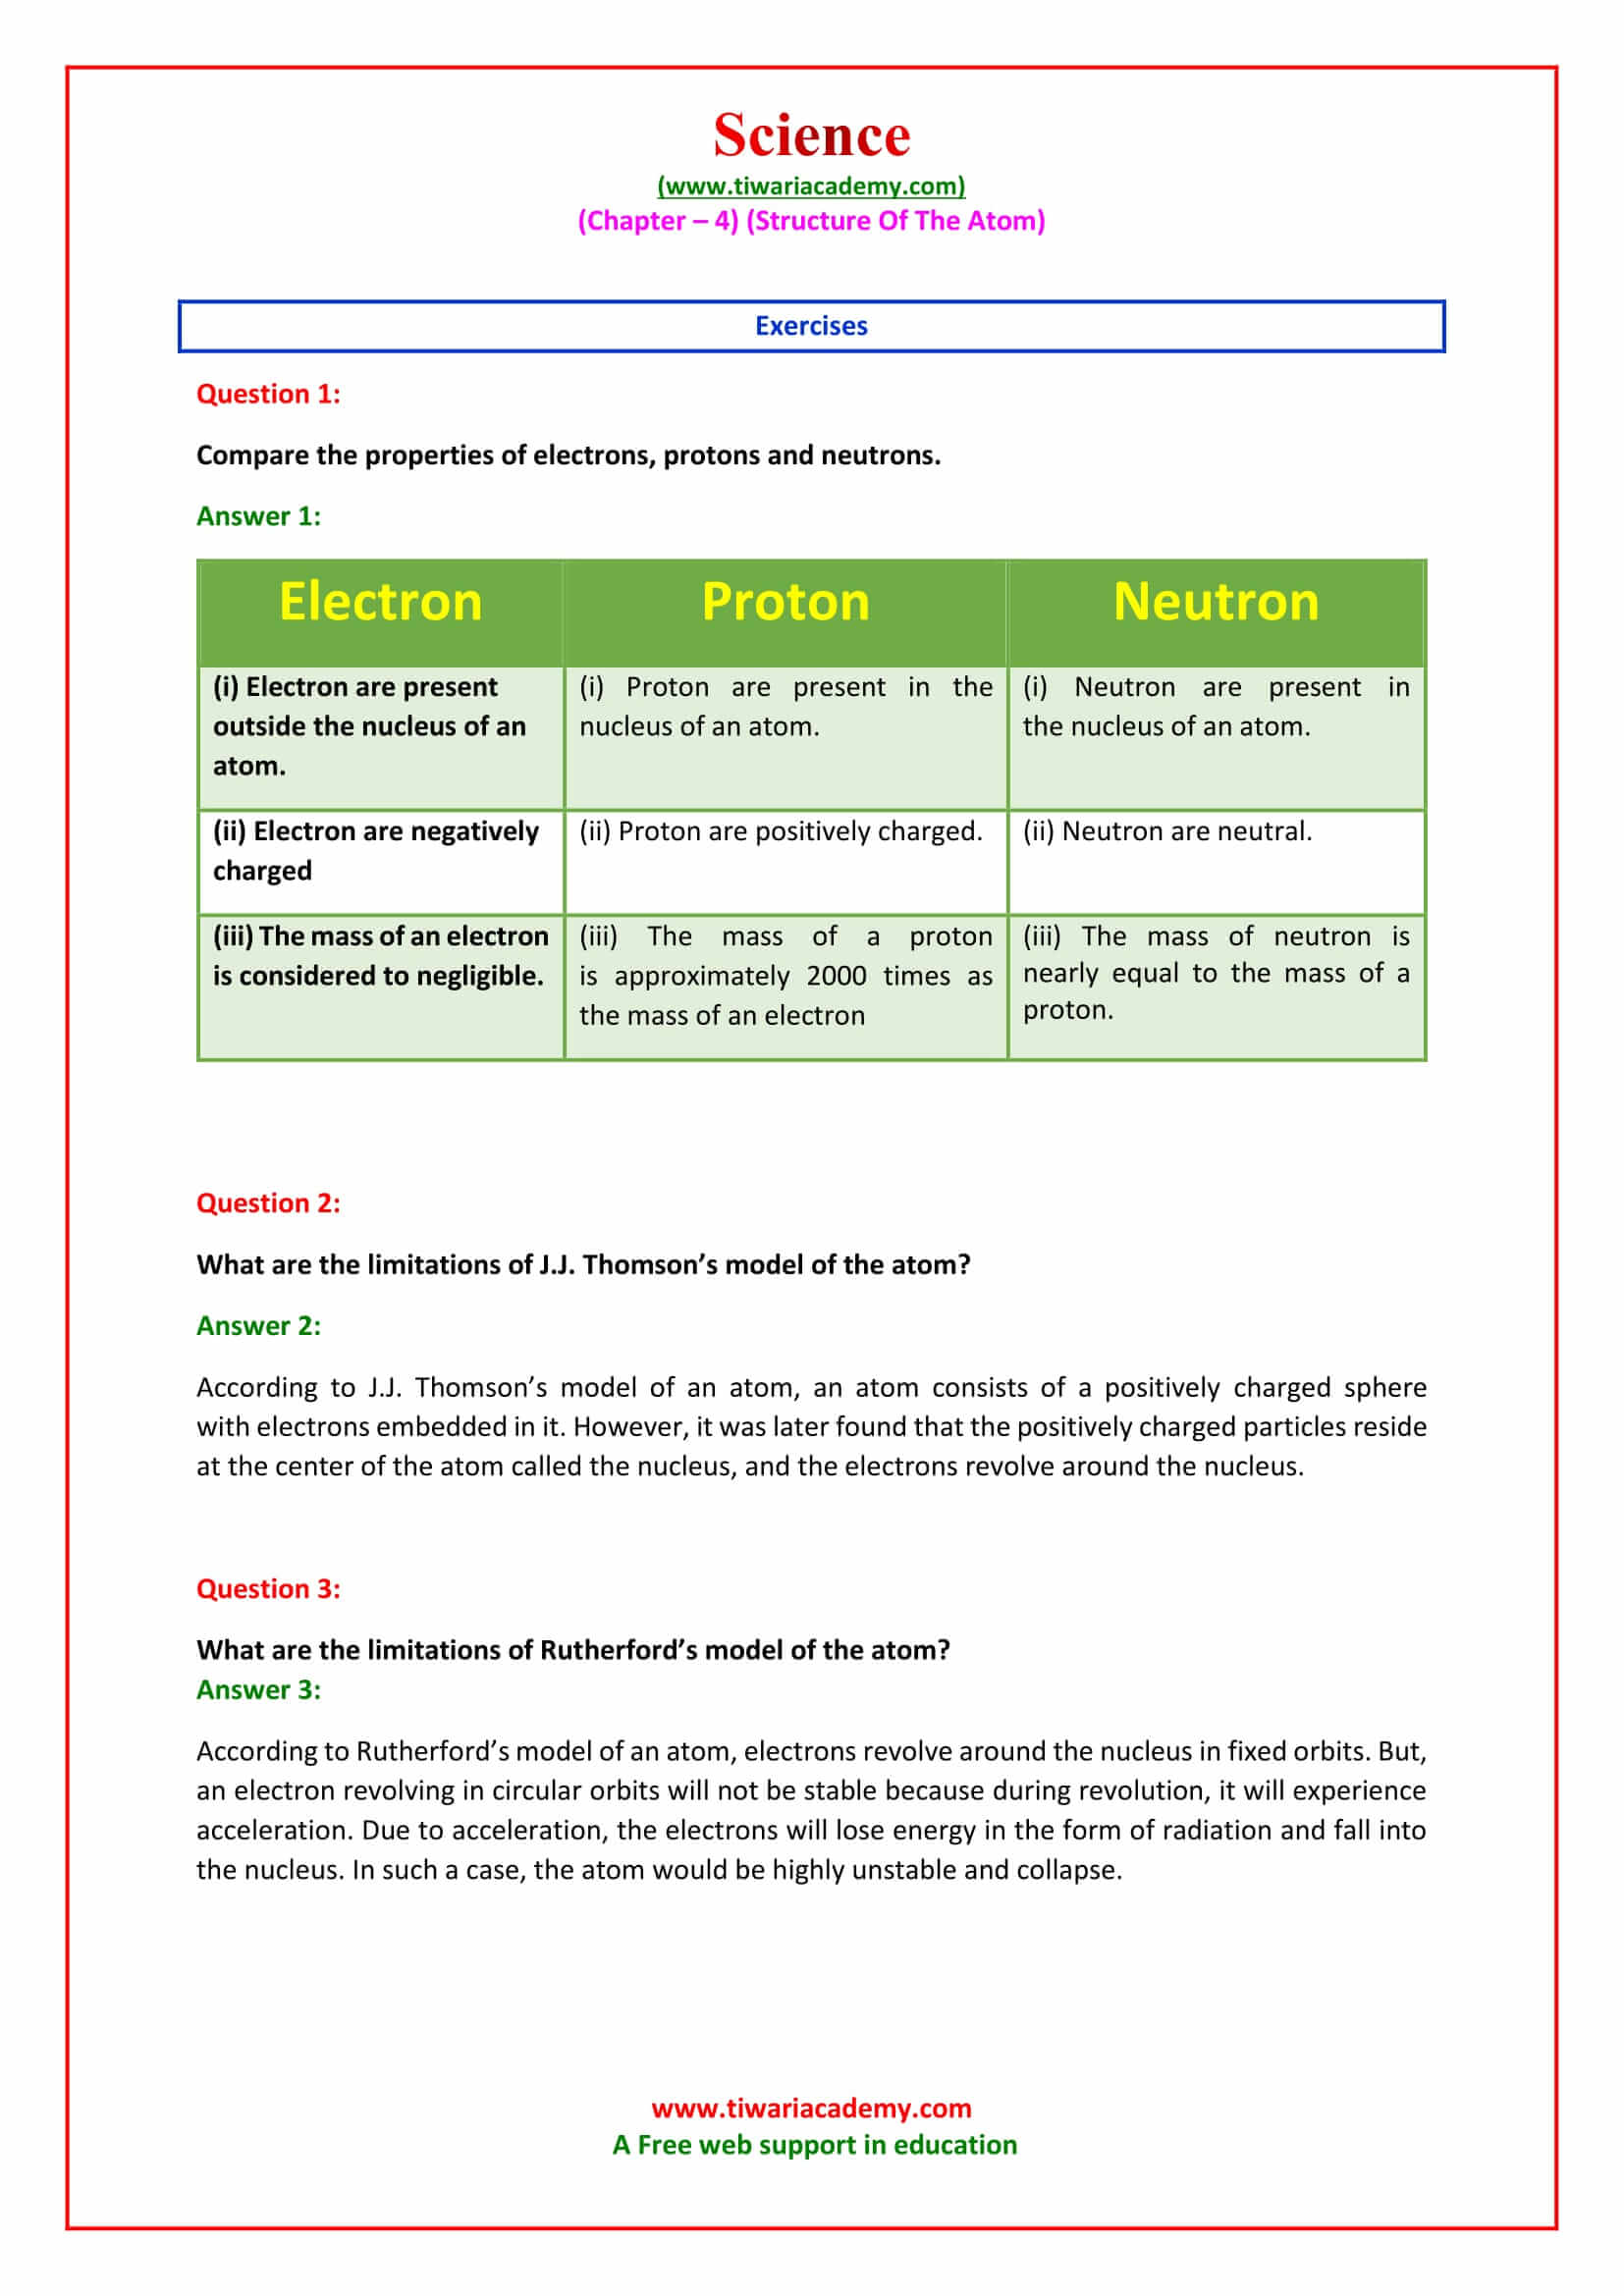 9 Science Chapter 4 Structure of the Atom Exercises Solutions